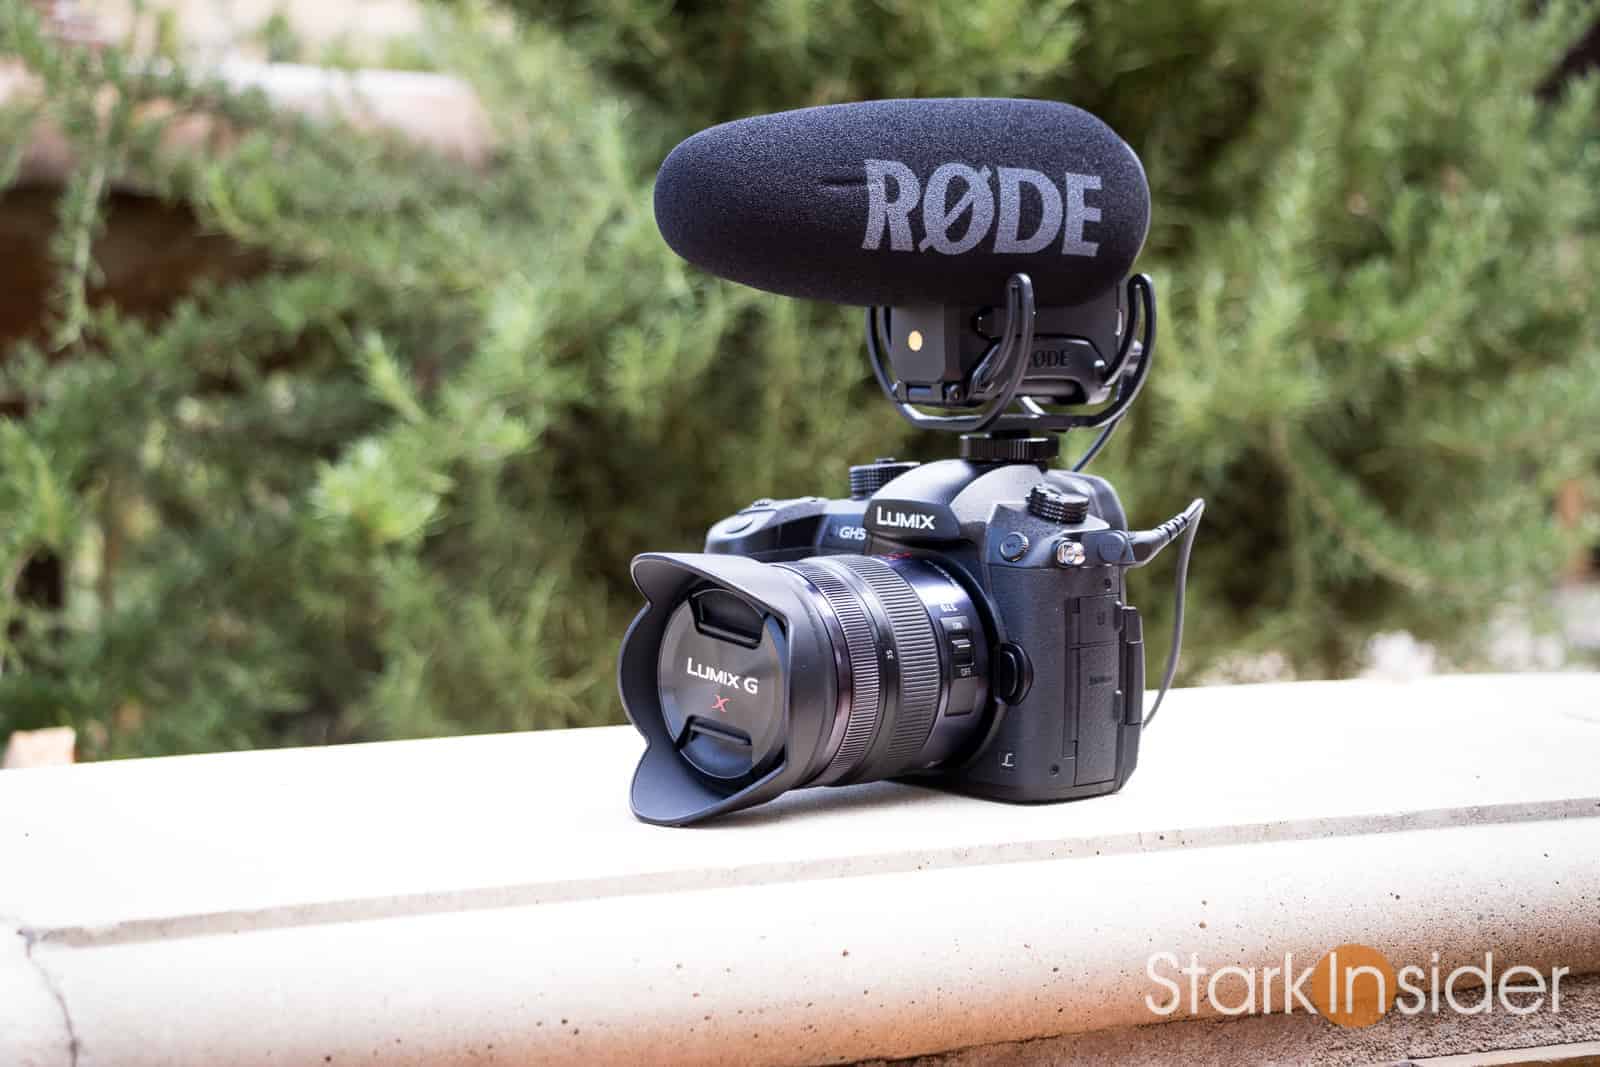 Top 3: accessories for your new DSLR or mirrorless camera | Stark Insider